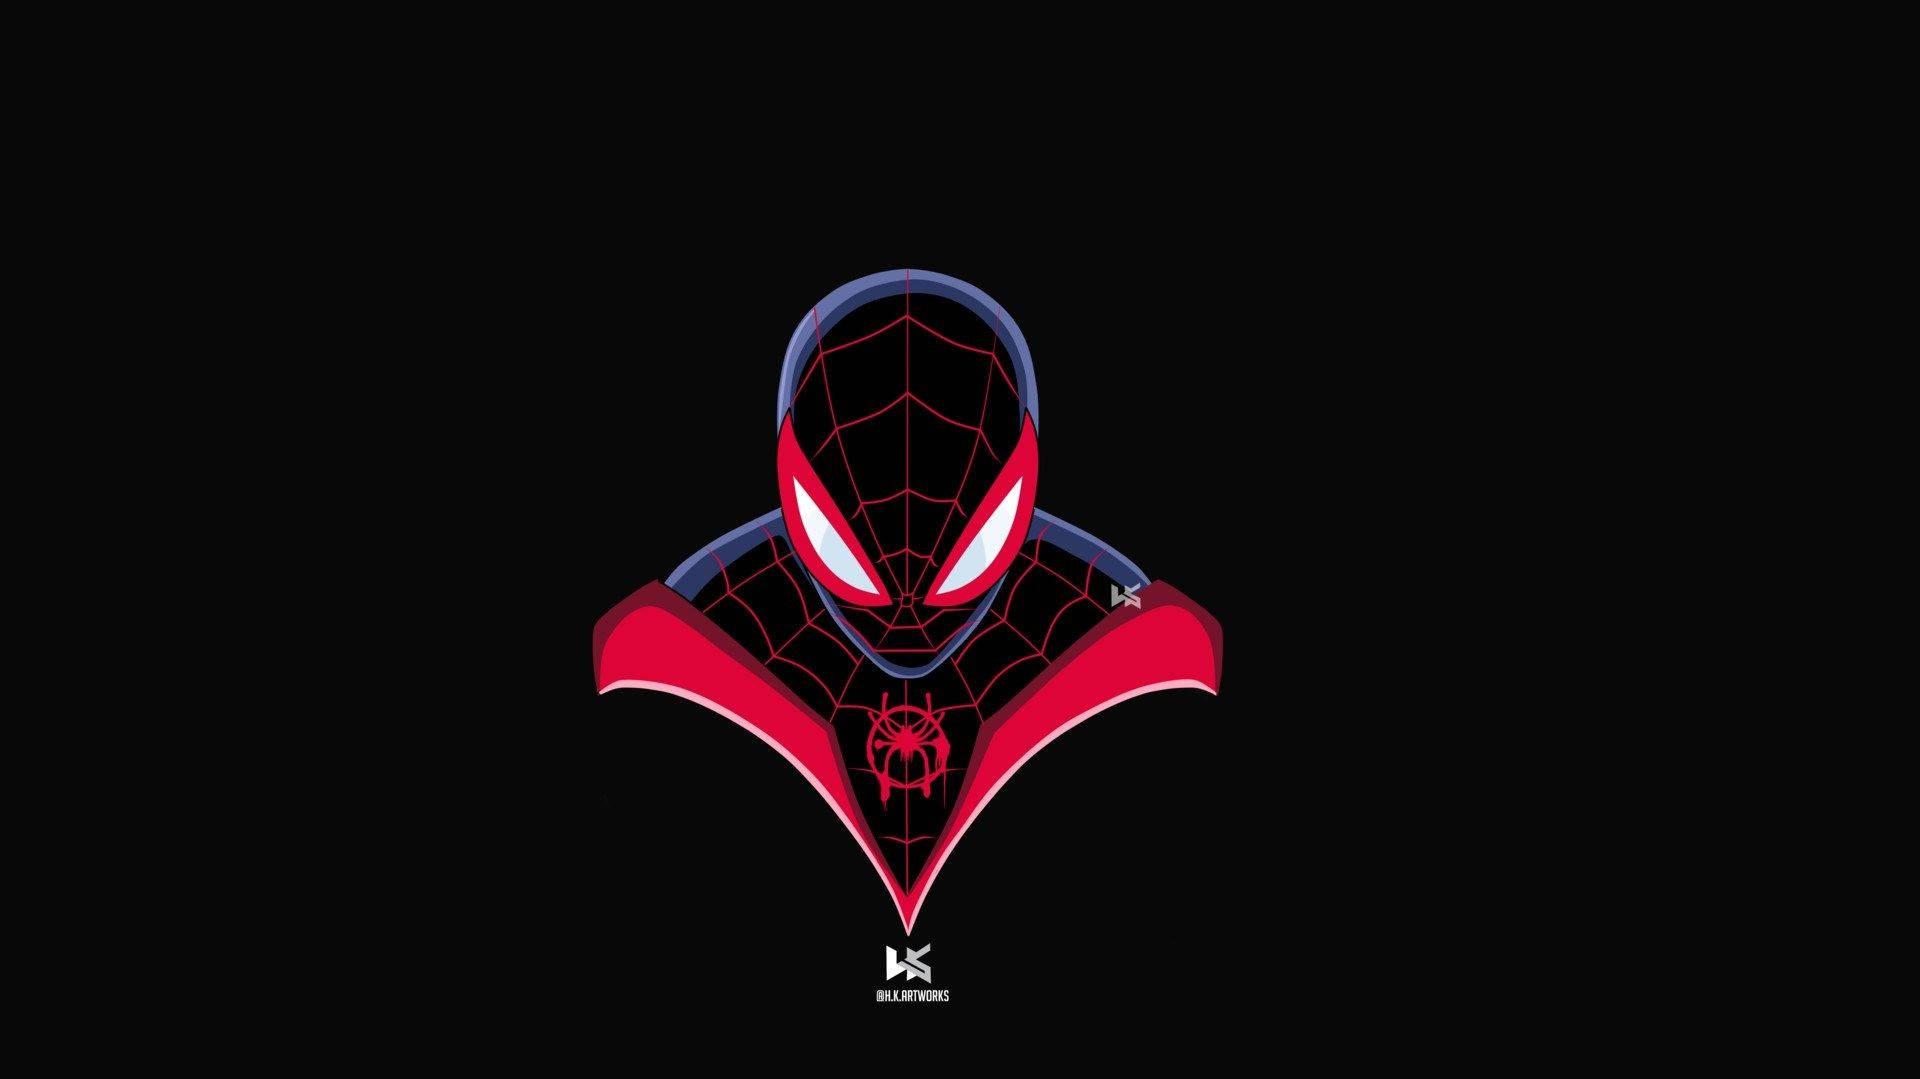 Spider Man Miles Morales On A Colourful Spider Verse 4K wallpaper download